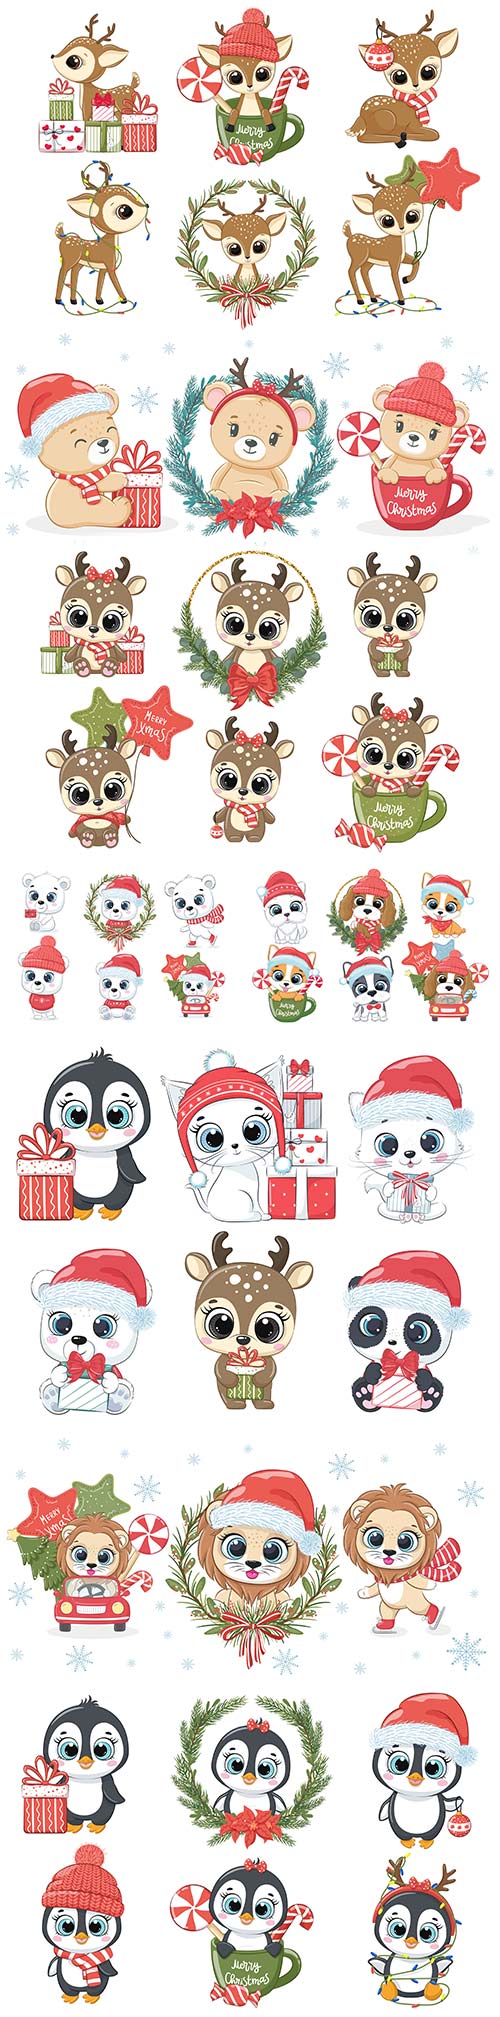 Cute vector animals for the new year and christmas